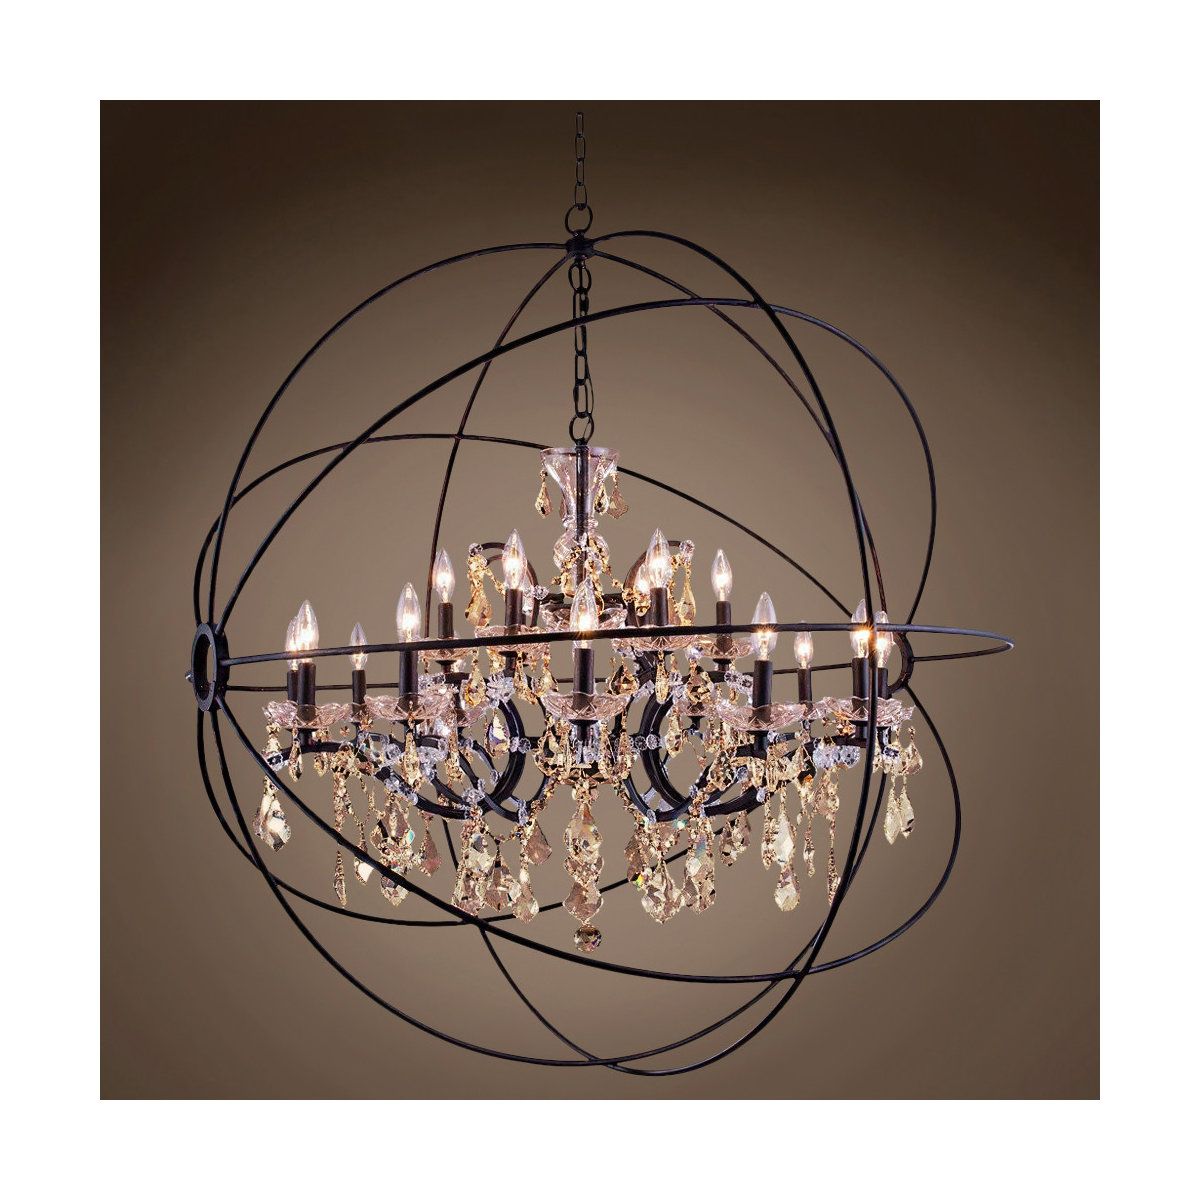 Shining Bright: The Beauty of a Crystal Orb Chandelier